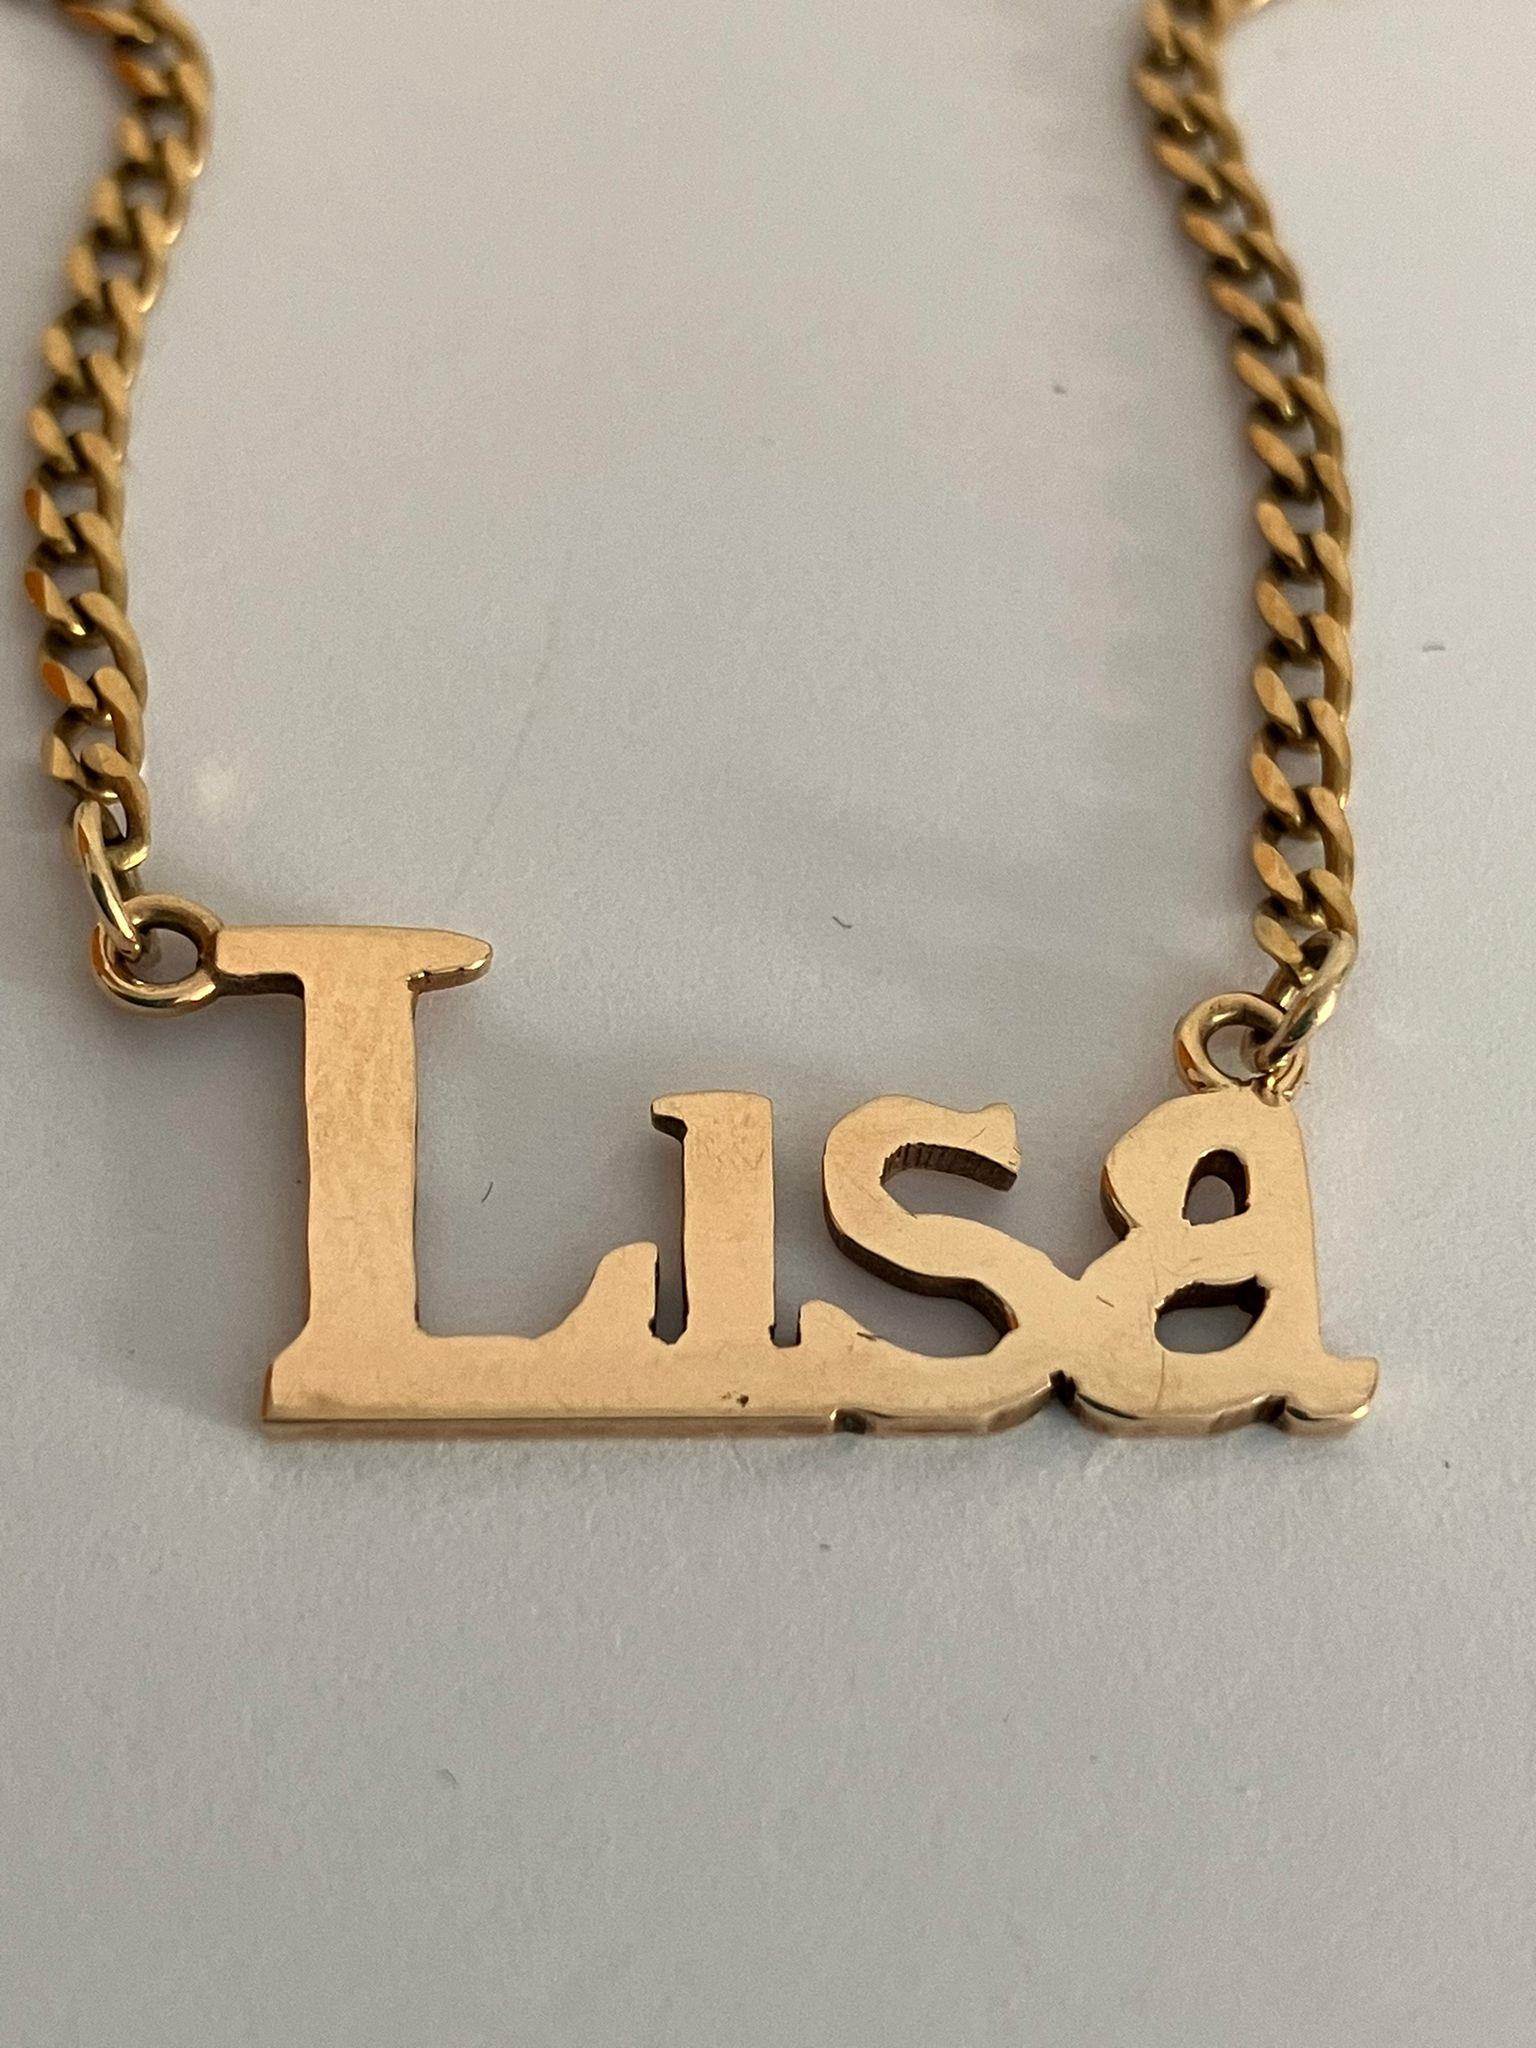 9 carat GOLD, CURB CHAIN NECKLACE with name of LISA. Full UK hallmark. 5.7 grams. 46 cm. - Image 3 of 11